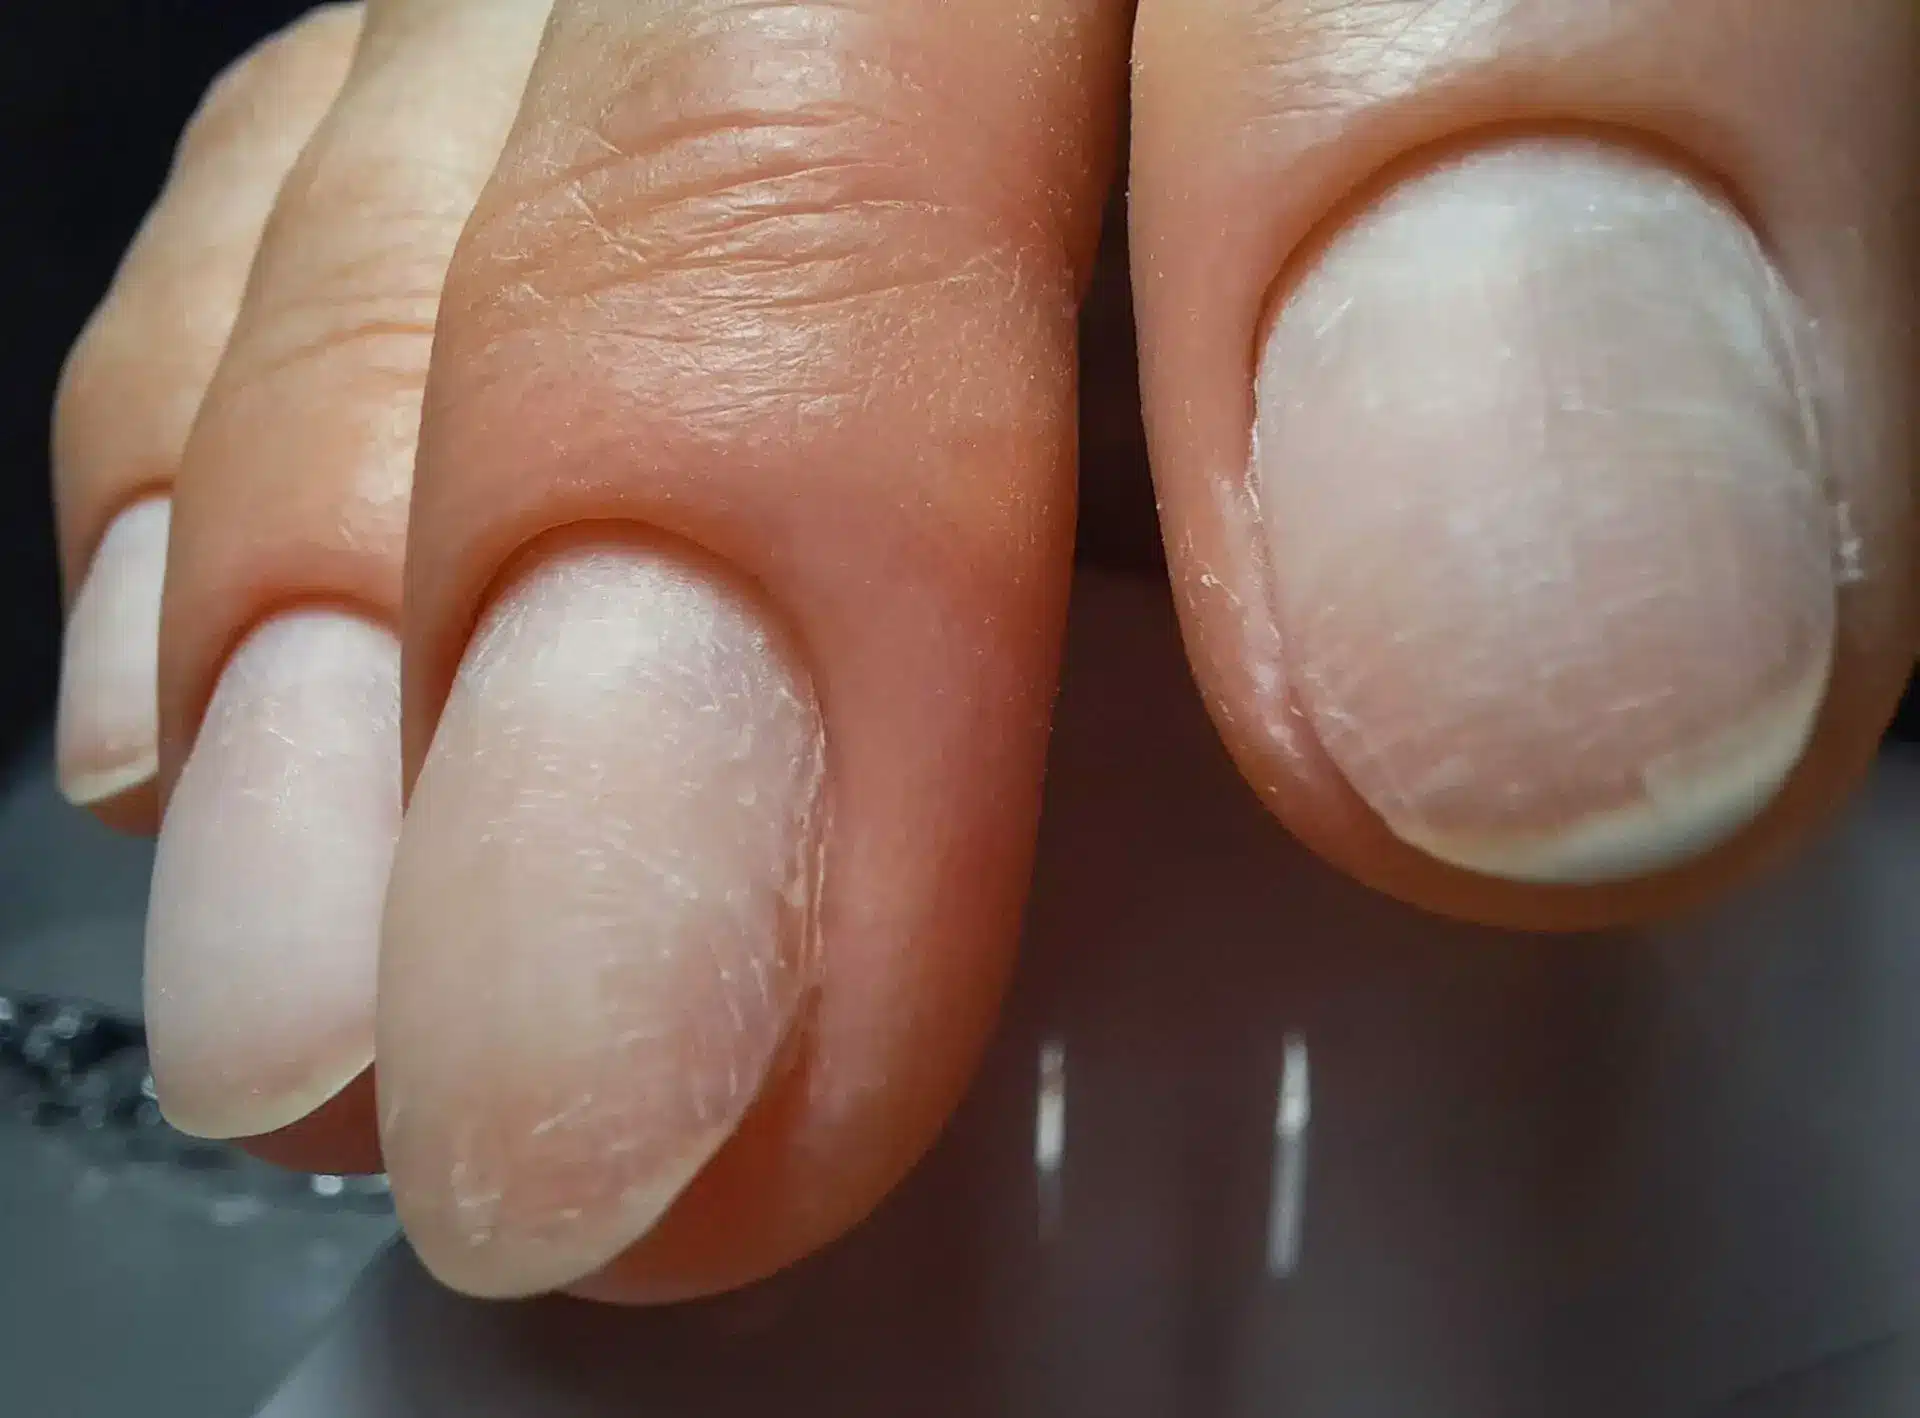 Partial Nail Removal (Matrixectomy) - Orthoriverside.com